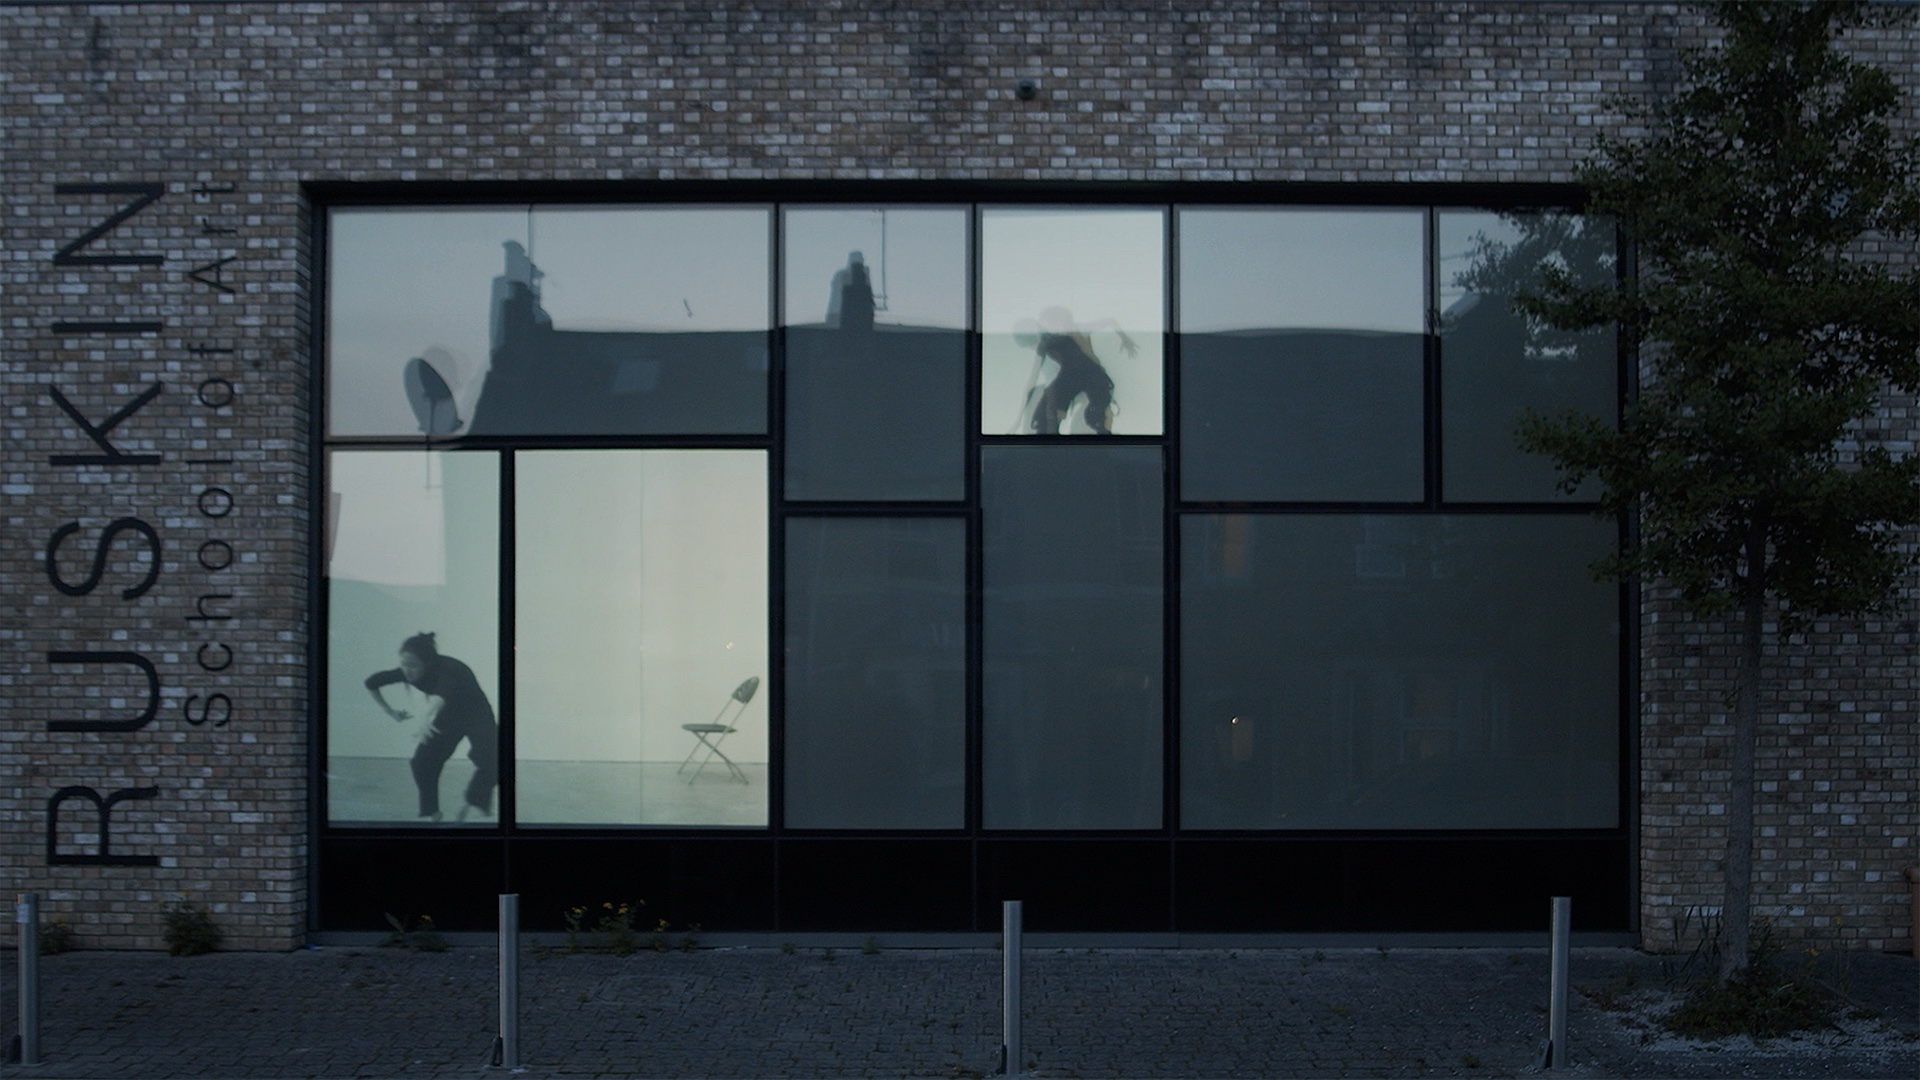 Split-screen film projected on the windows of the Ruskin's Bullingdon Road studio. Anonymous users move through each window, or 'chat-room', to find and doxx TOM, the digital pirate who has invaded their space. 